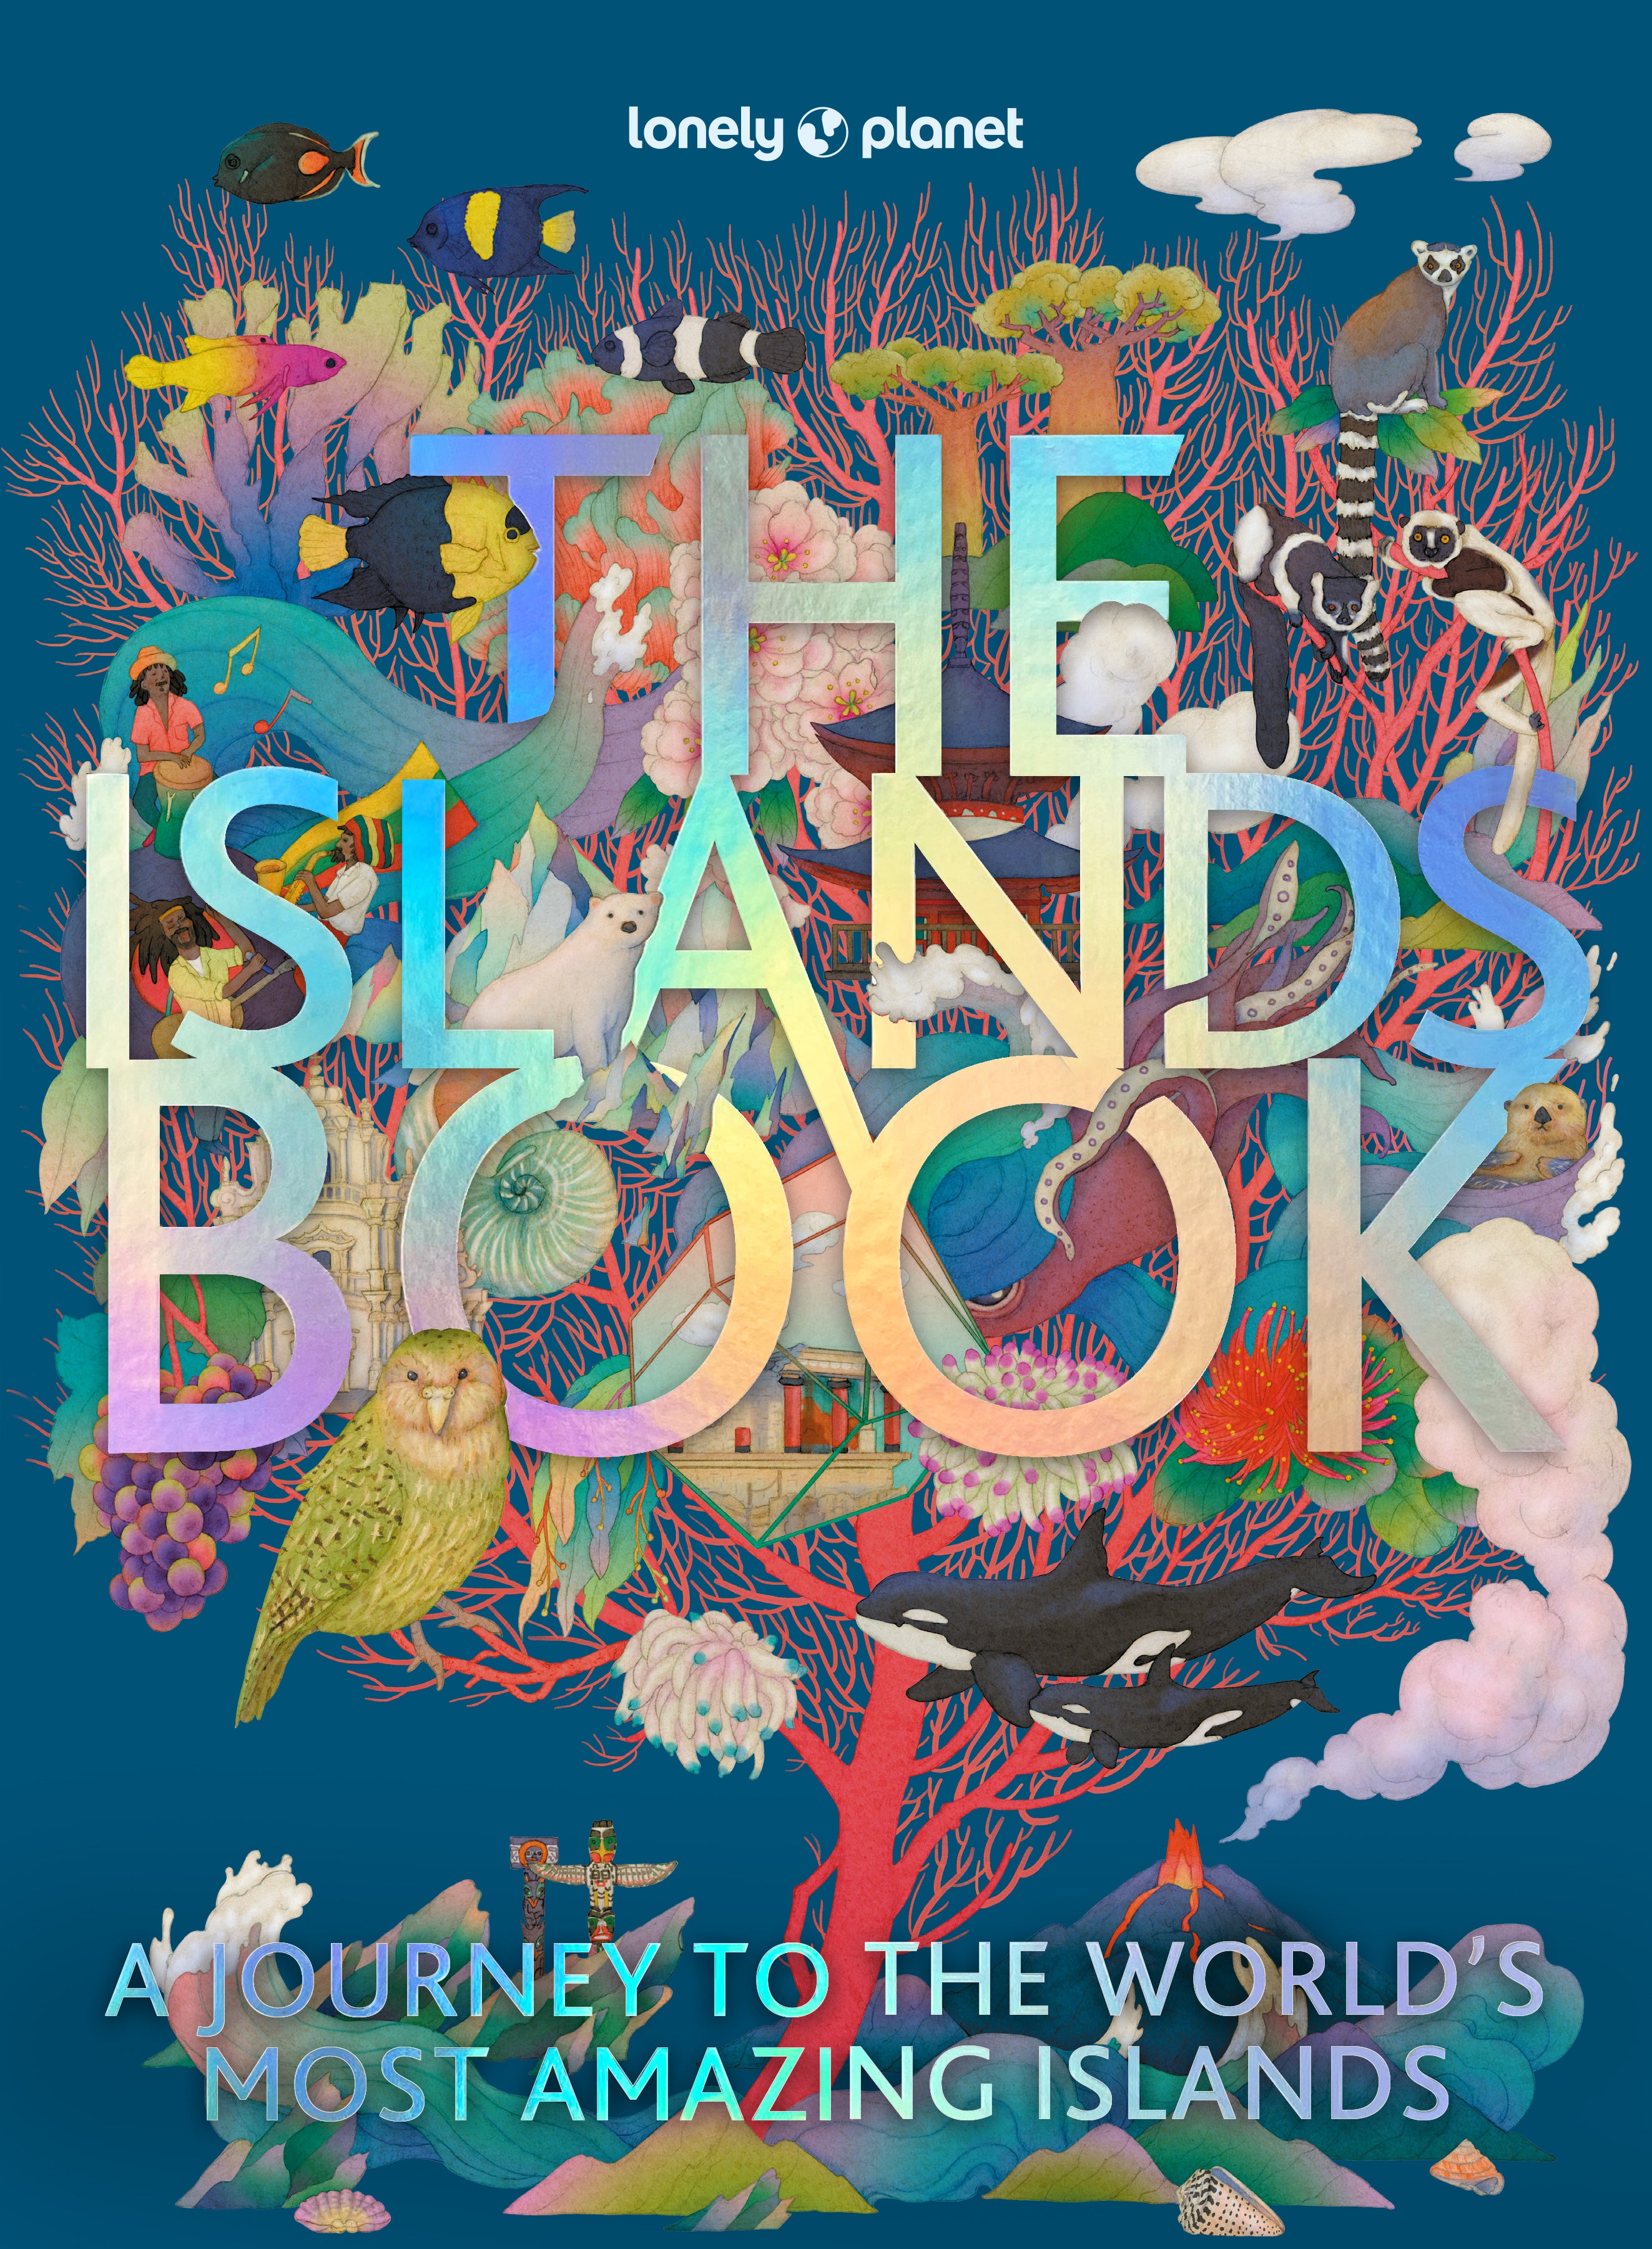 Lonely Planet The Islands Book: A Journey to the World's Most Amazing Islands